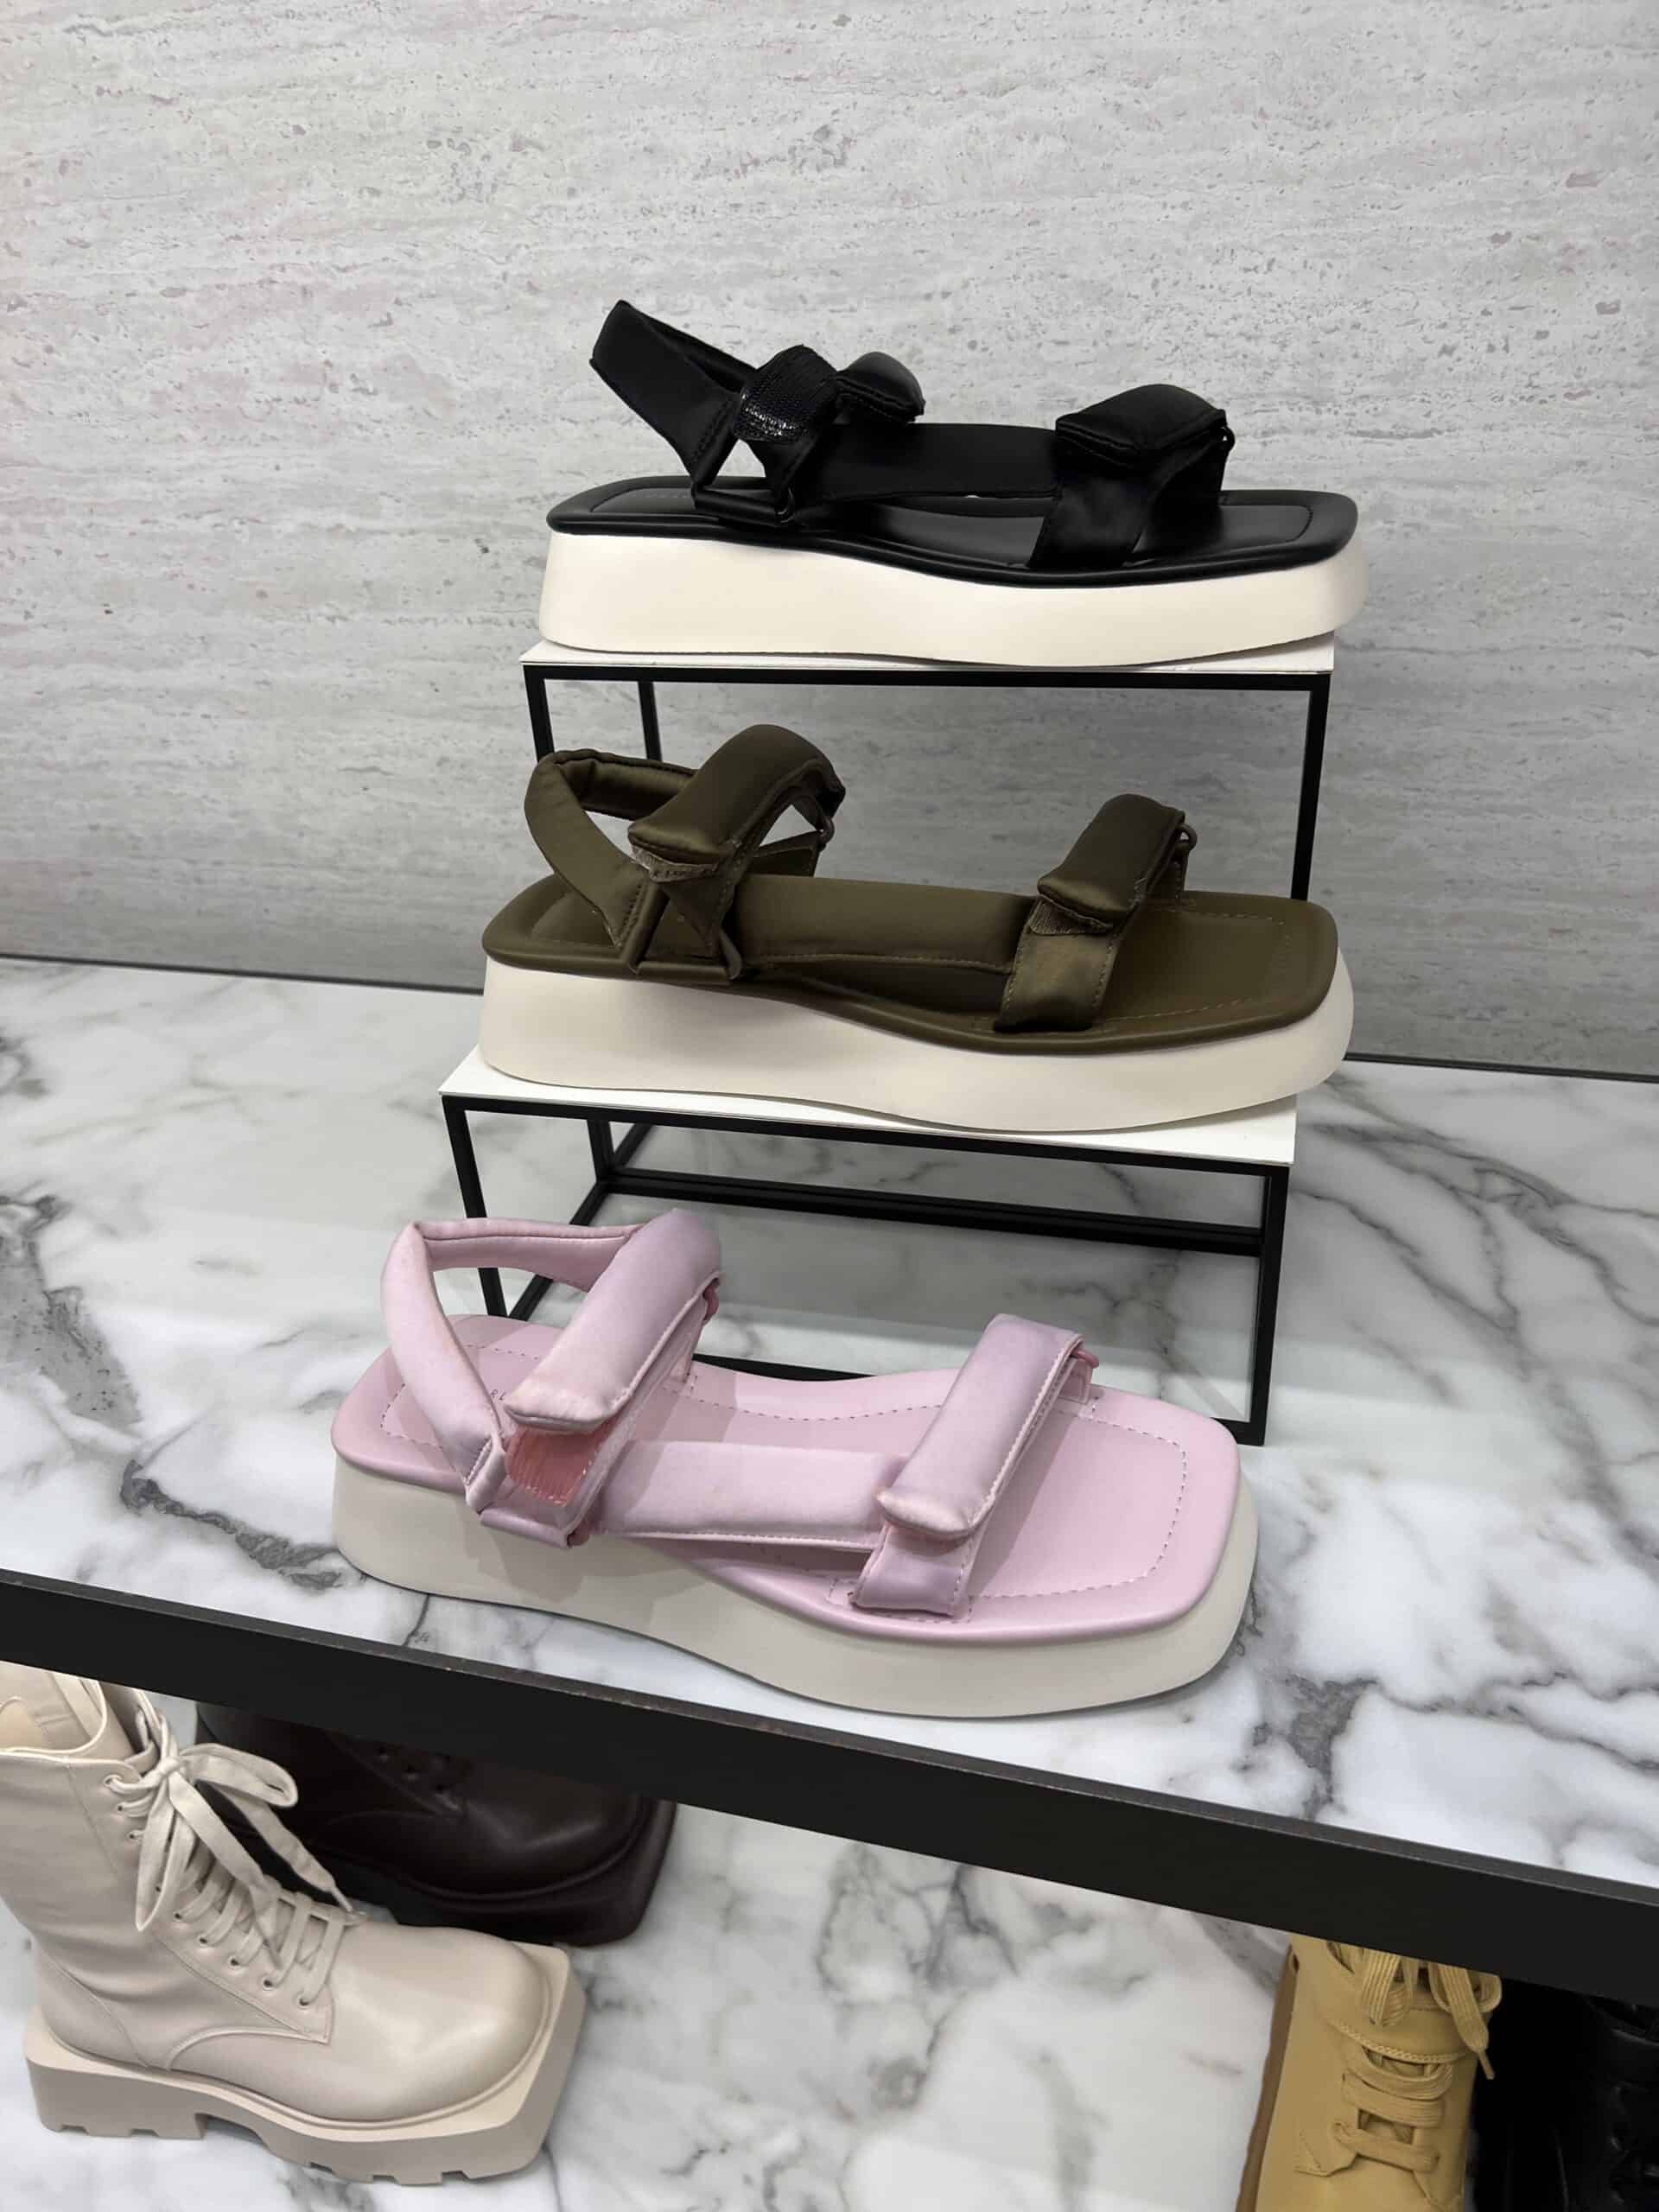 retail women ss23 flat sandals sporty flatform velcro leather soft black brown pink charleskeith